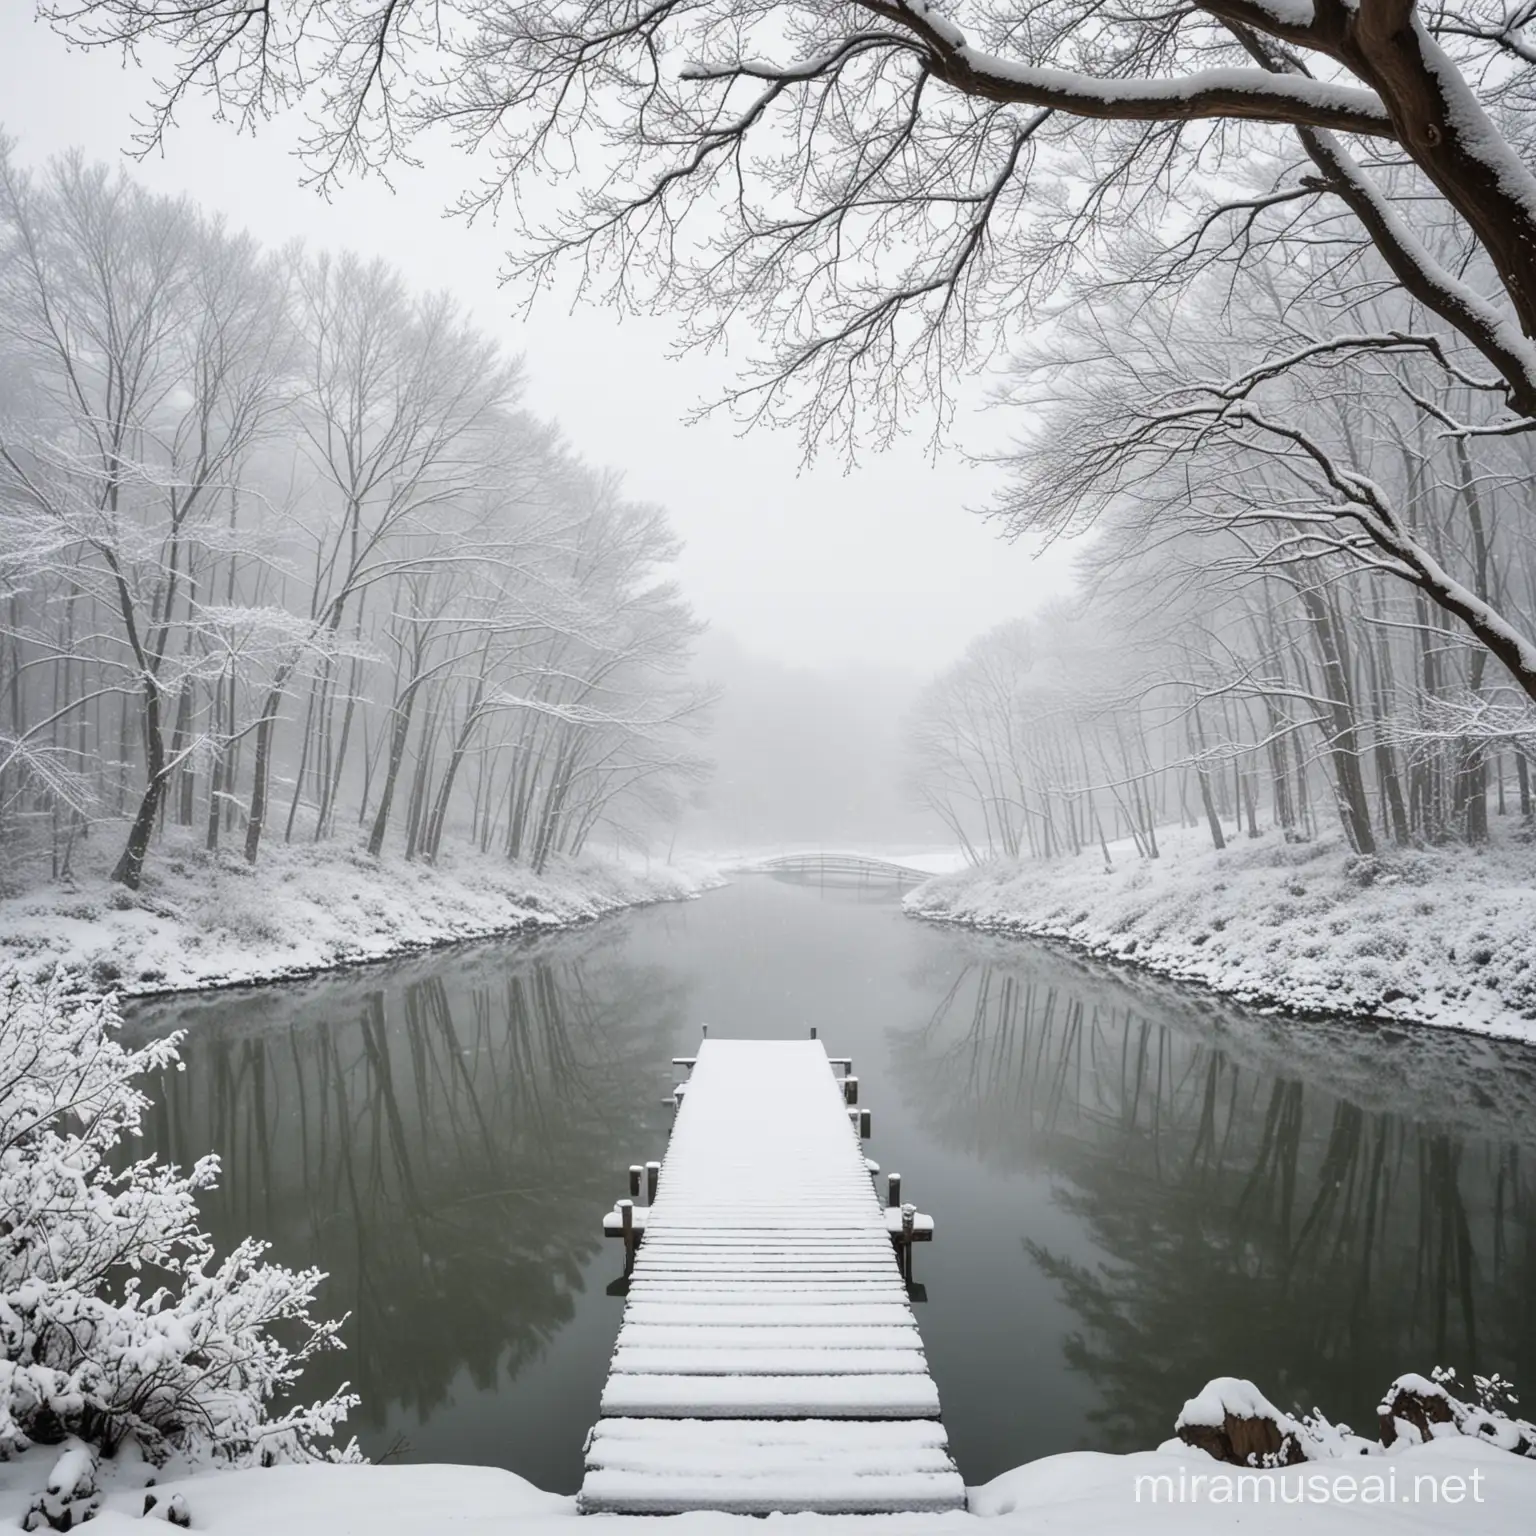 A serene and dreamy photo of a snowy morning at Hibara Lake in Yama-gun, Fukushima, Japan. The lake, partially covered in a blanket of fresh snow, reflects the foggy sky above. The surrounding trees are dusted in snow, their branches bent under the weight. A wooden bridge, partially visible through the mist, leads to a small island, creating a picturesque scene. The overall ambiance of the photo is tranquil and peaceful, with a sense of calmness and natural beauty., photo,